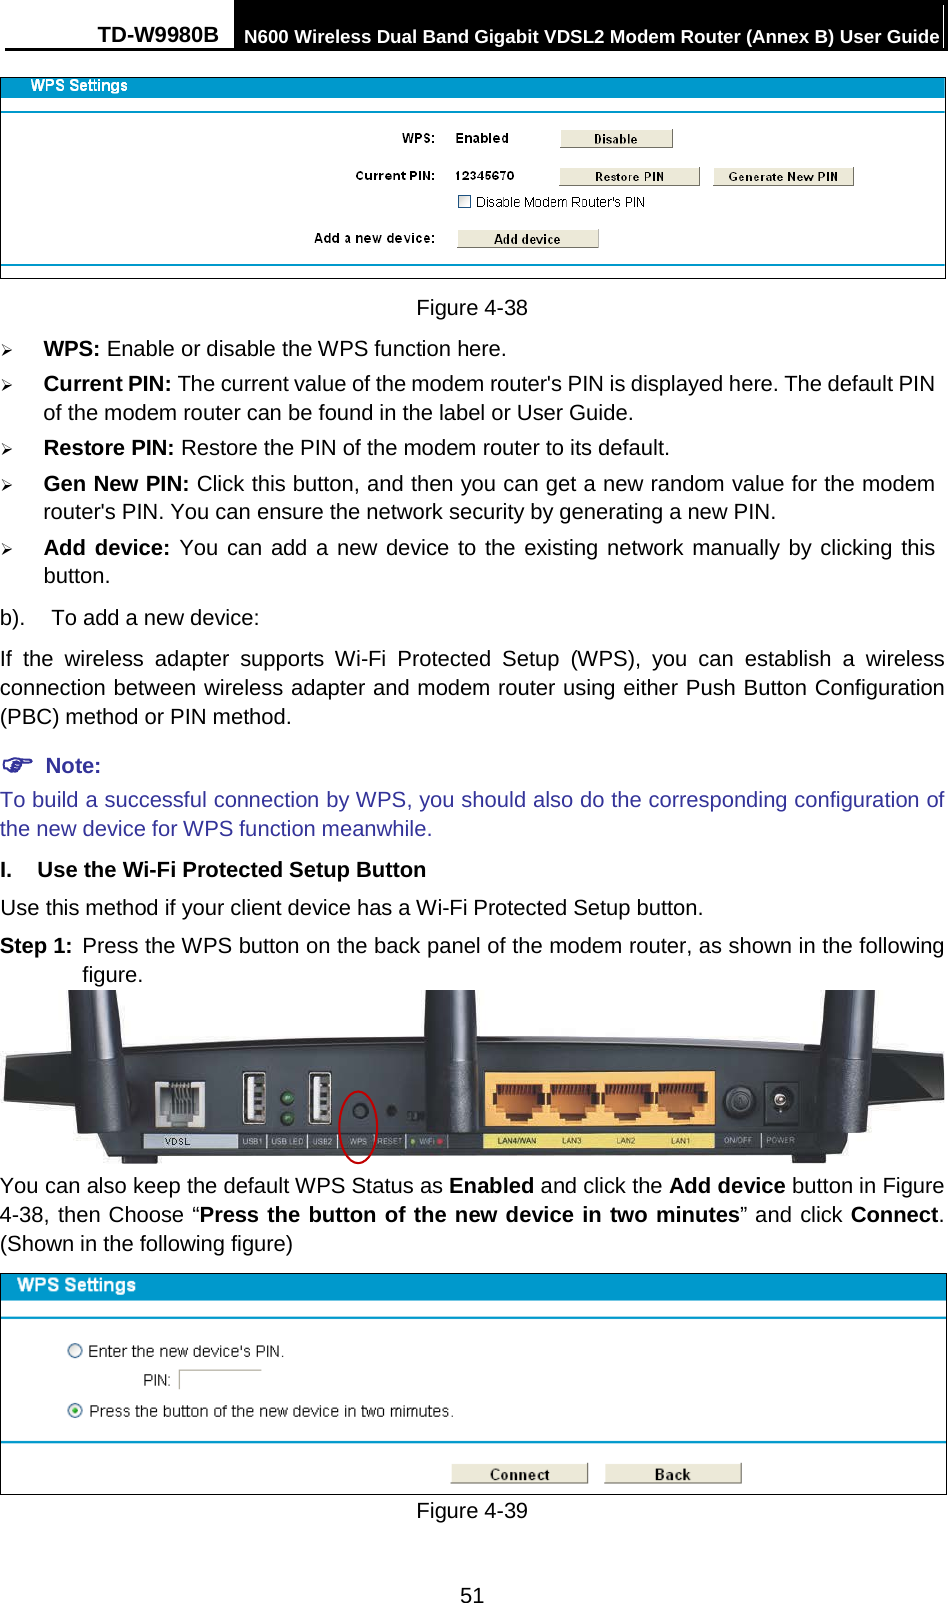 TD-W9980B N600 Wireless Dual Band Gigabit VDSL2 Modem Router (Annex B) User Guide   Figure 4-38  WPS: Enable or disable the WPS function here.    Current PIN: The current value of the modem router&apos;s PIN is displayed here. The default PIN of the modem router can be found in the label or User Guide.    Restore PIN: Restore the PIN of the modem router to its default.    Gen New PIN: Click this button, and then you can get a new random value for the modem router&apos;s PIN. You can ensure the network security by generating a new PIN.  Add device: You can add a new device to the existing network manually by clicking this button. b). To add a new device: If  the wireless adapter supports Wi-Fi Protected Setup (WPS), you can establish a wireless connection between wireless adapter and modem router using either Push Button Configuration (PBC) method or PIN method.  Note: To build a successful connection by WPS, you should also do the corresponding configuration of the new device for WPS function meanwhile. I. Use the Wi-Fi Protected Setup Button Use this method if your client device has a Wi-Fi Protected Setup button. Step 1: Press the WPS button on the back panel of the modem router, as shown in the following figure.  You can also keep the default WPS Status as Enabled and click the Add device button in Figure 4-38, then Choose “Press the button of the new device in two minutes” and click Connect. (Shown in the following figure)  Figure 4-39 51 